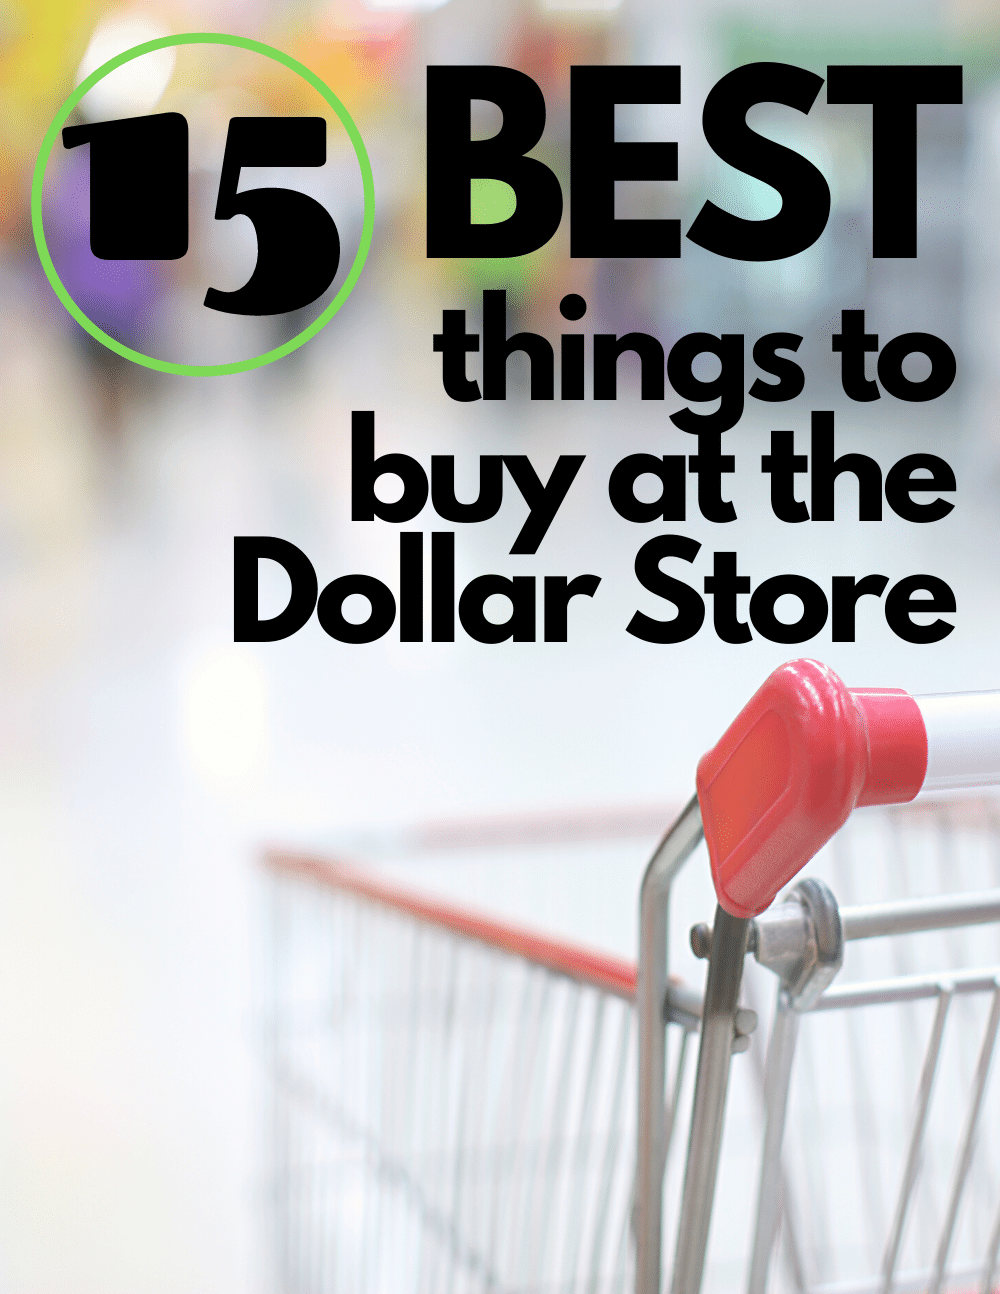 15 Best things to buy at the Dollar Store